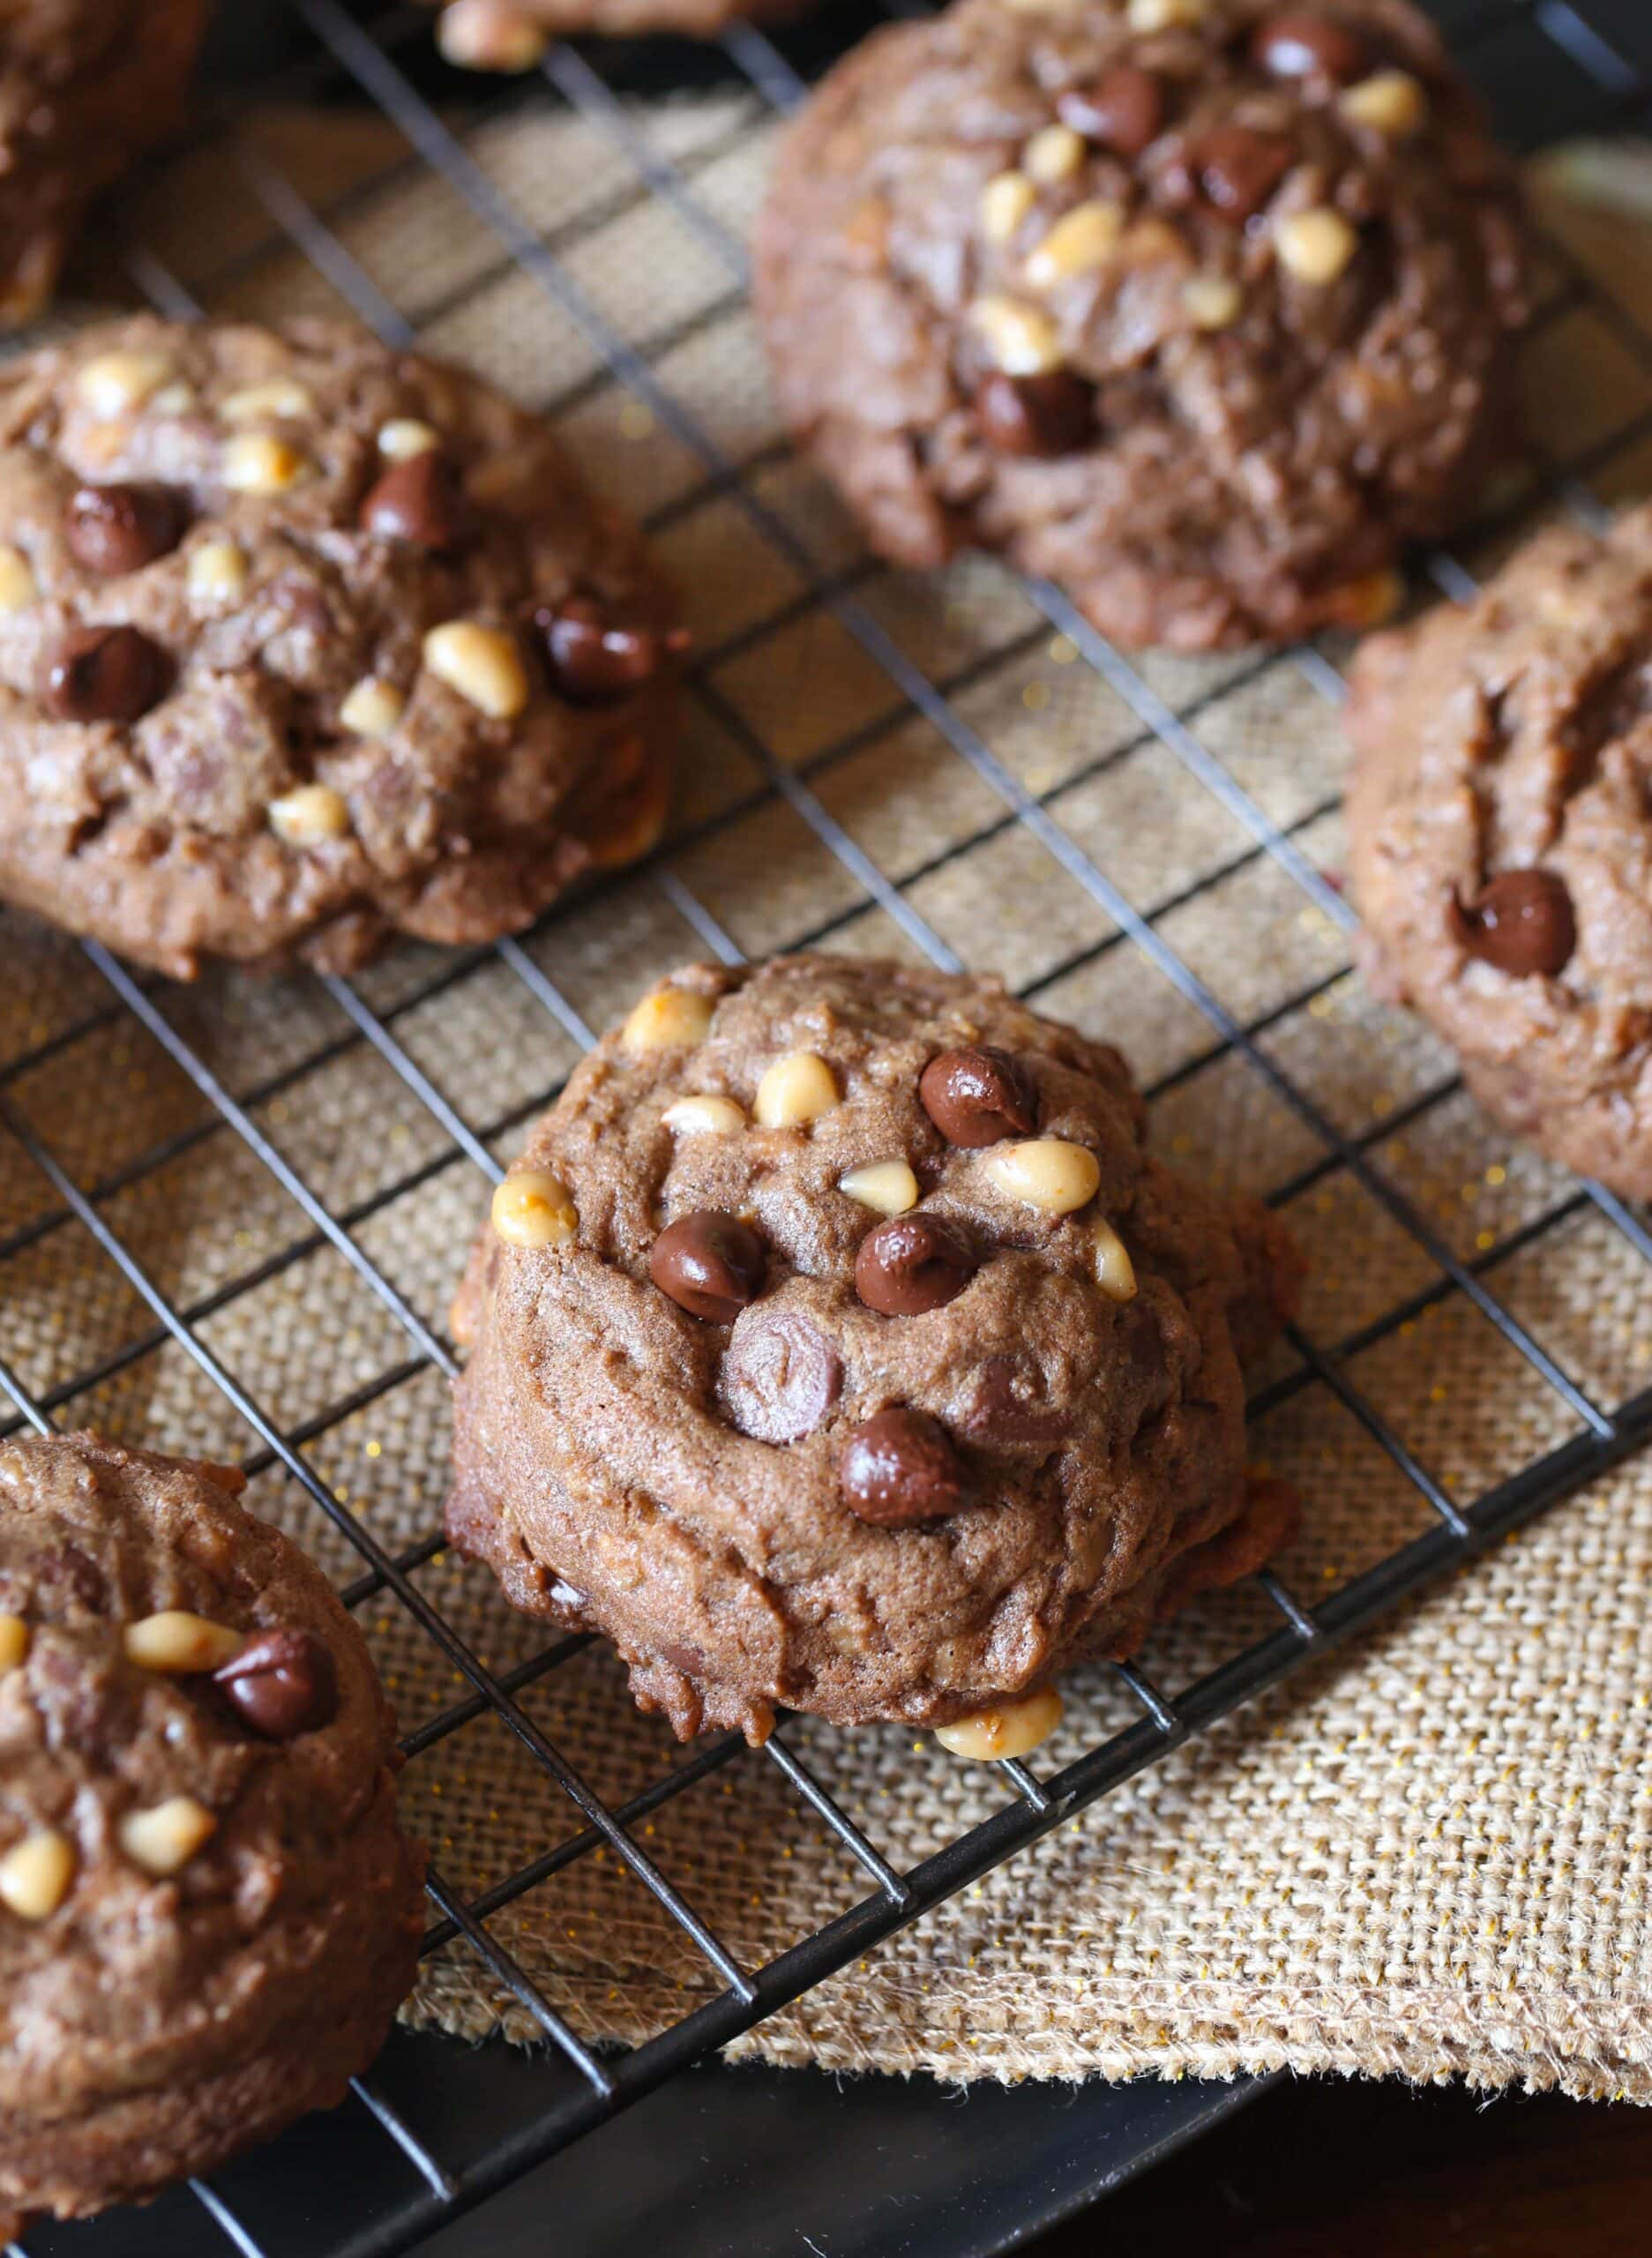 These Chocolate Toffee Cookies are thick, chocolaty and full of chocolate chips and toffee bits! The inside texture is like a brownie! So GOOD!